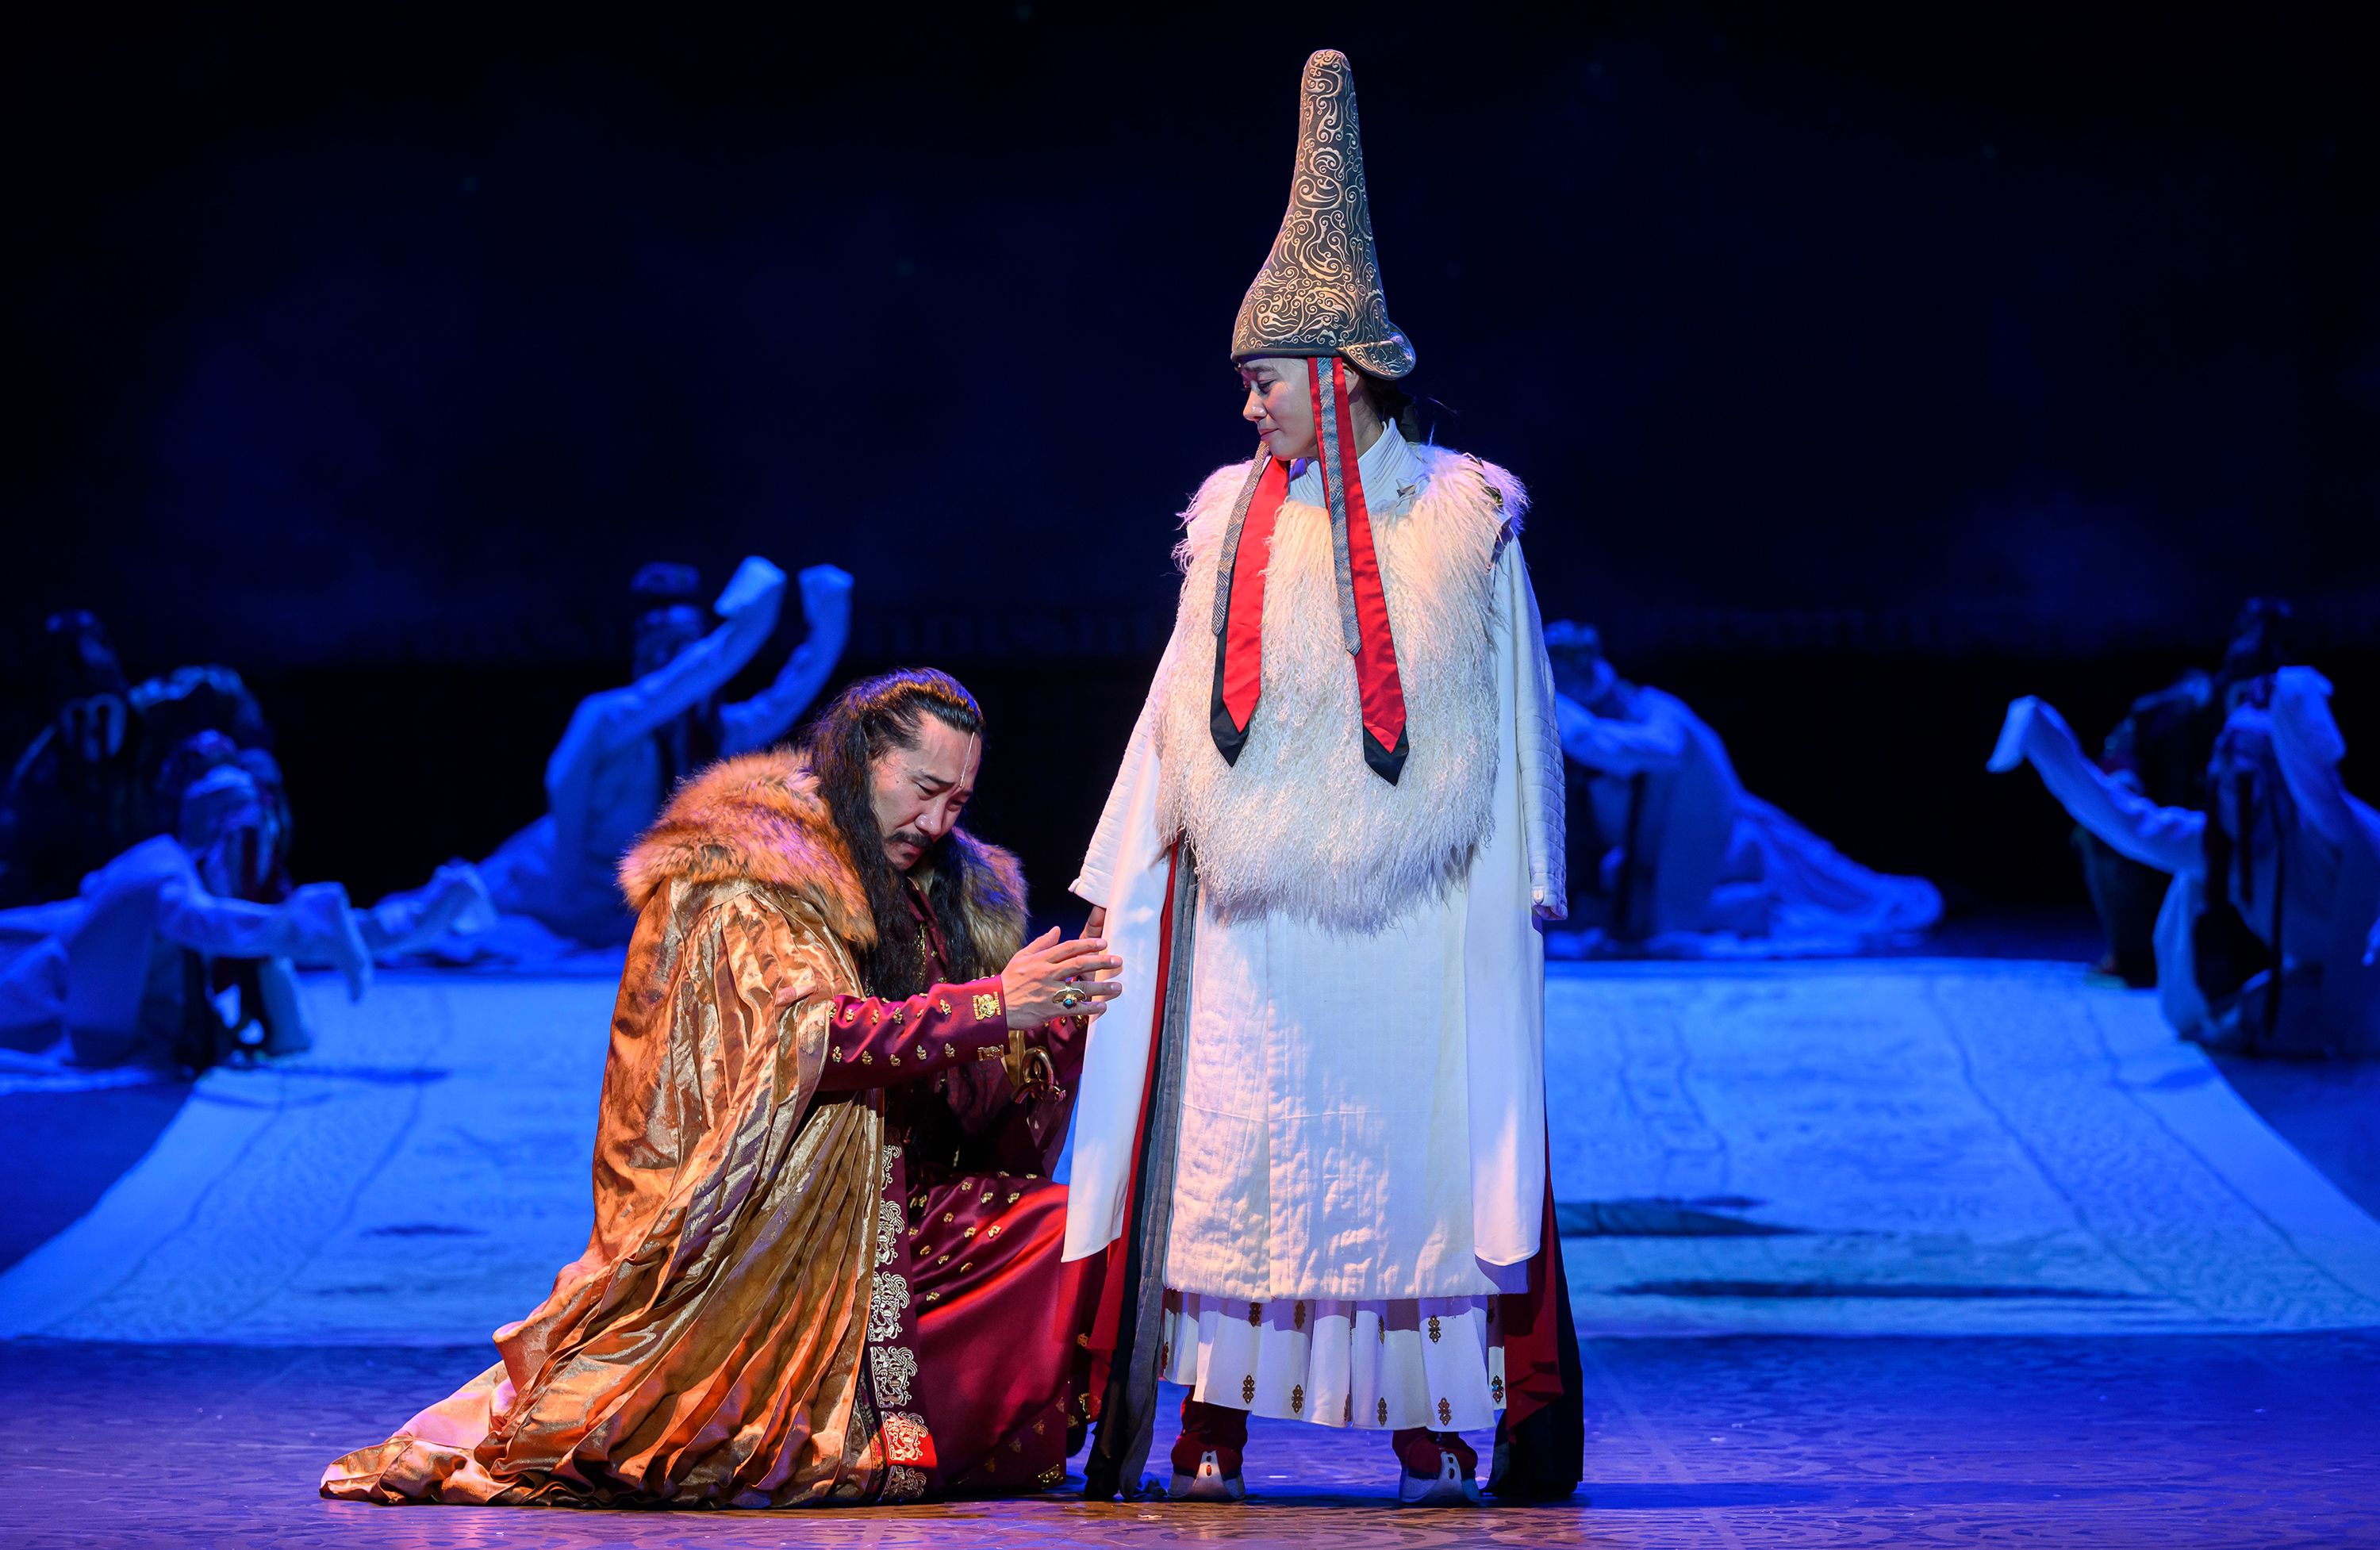 With a cast of more than 70 actors, dancers and musicians, “The Mongol Khan” is "a riot of color and sound."